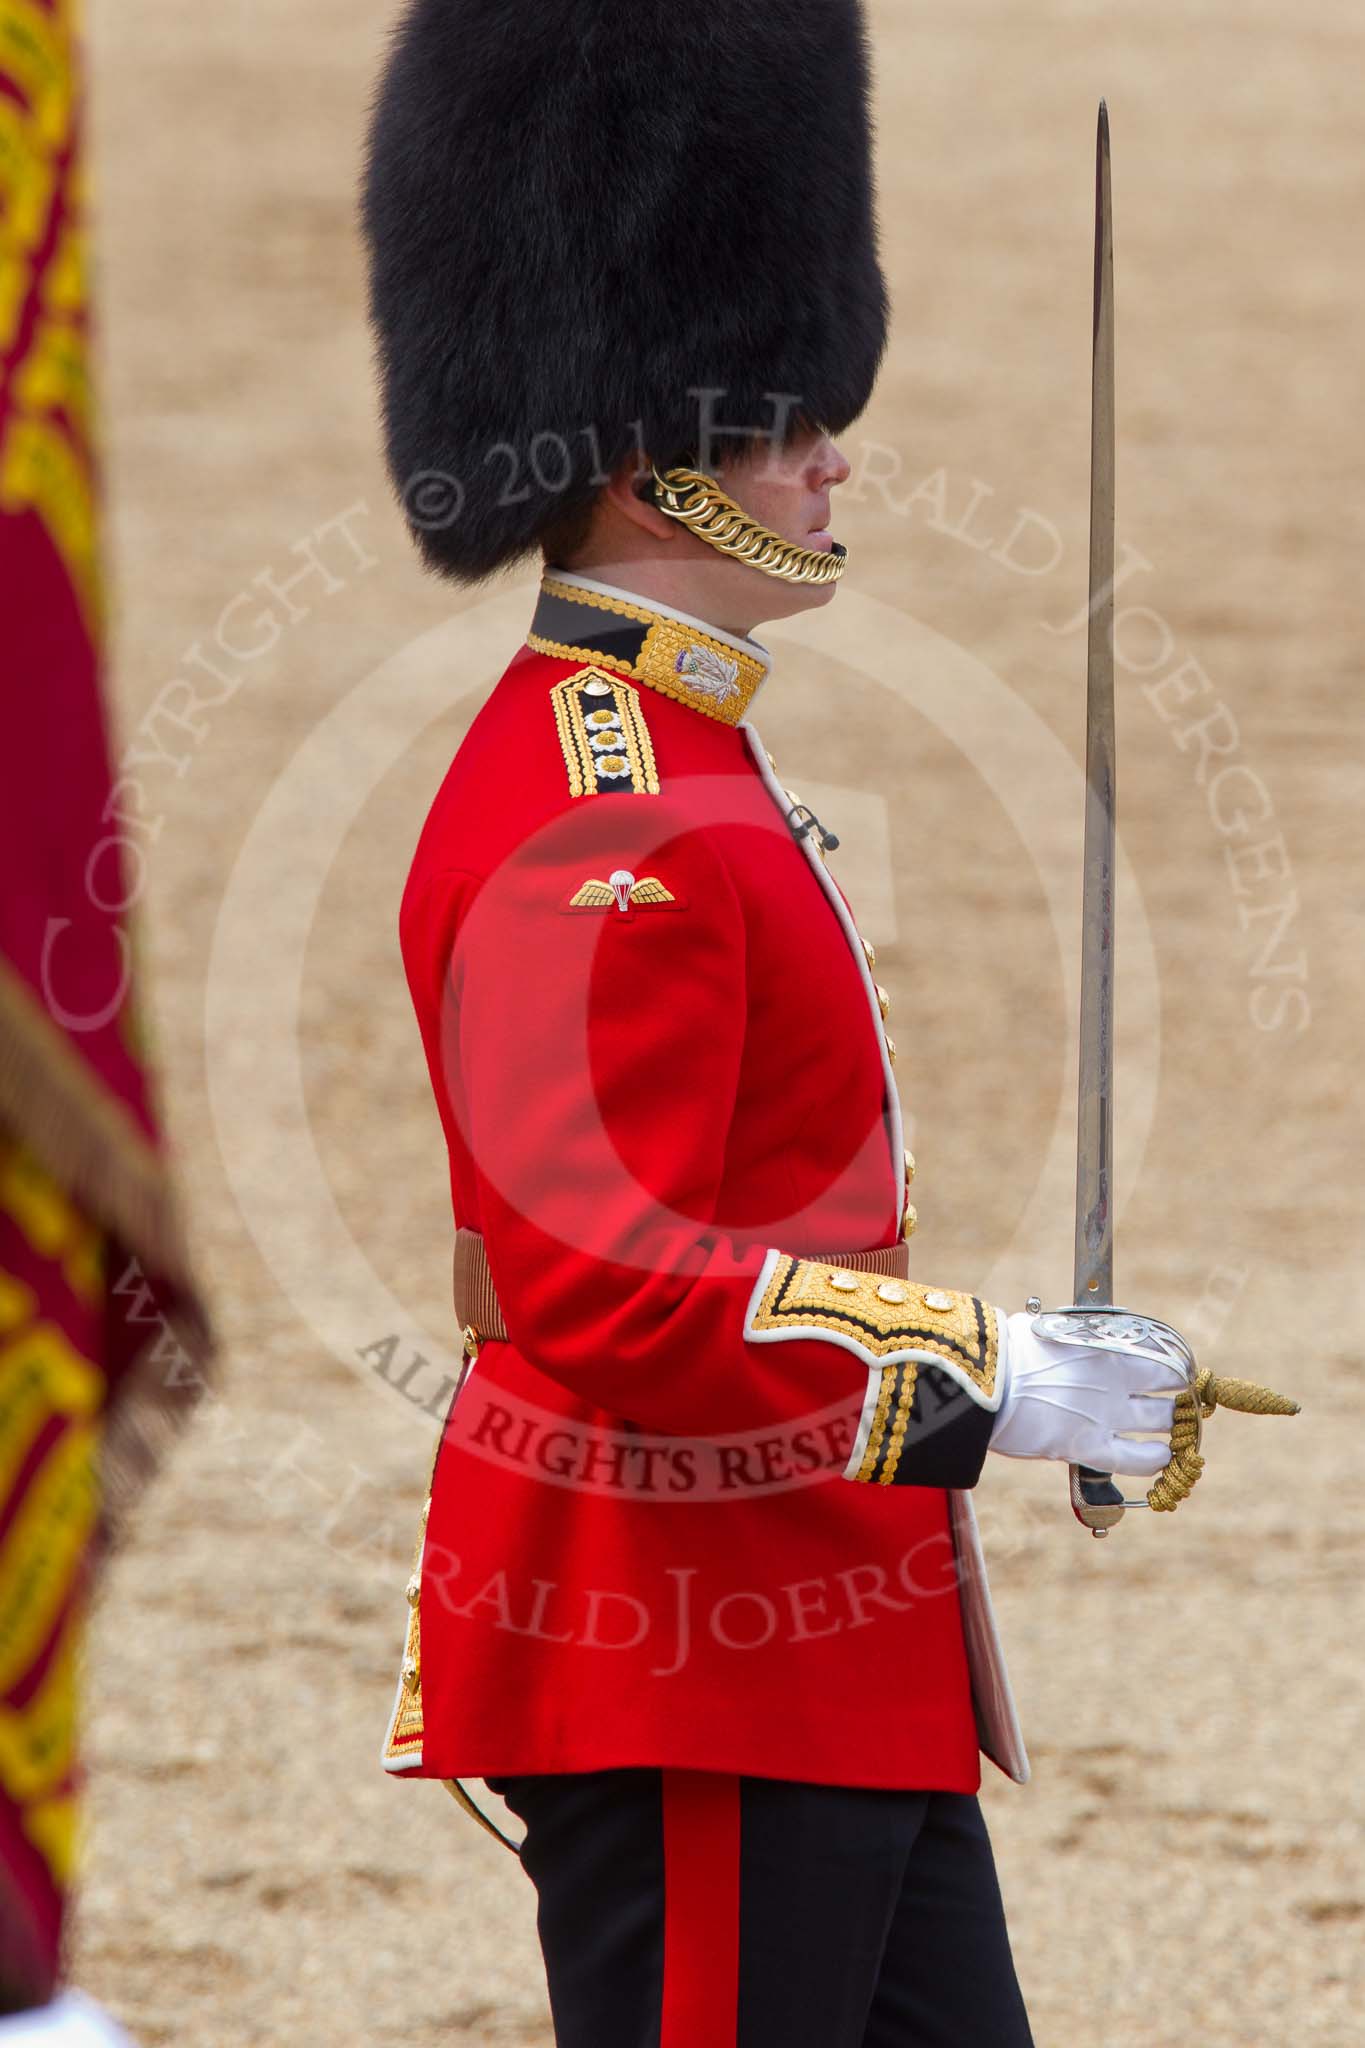 Trooping the Colour 2011: Captain D L Krause-Harder-Calthorpe, 1st Battalion Scots Guards, the Subaltern to the Escort..
Horse Guards Parade, Westminster,
London SW1,
Greater London,
United Kingdom,
on 11 June 2011 at 11:36, image #238